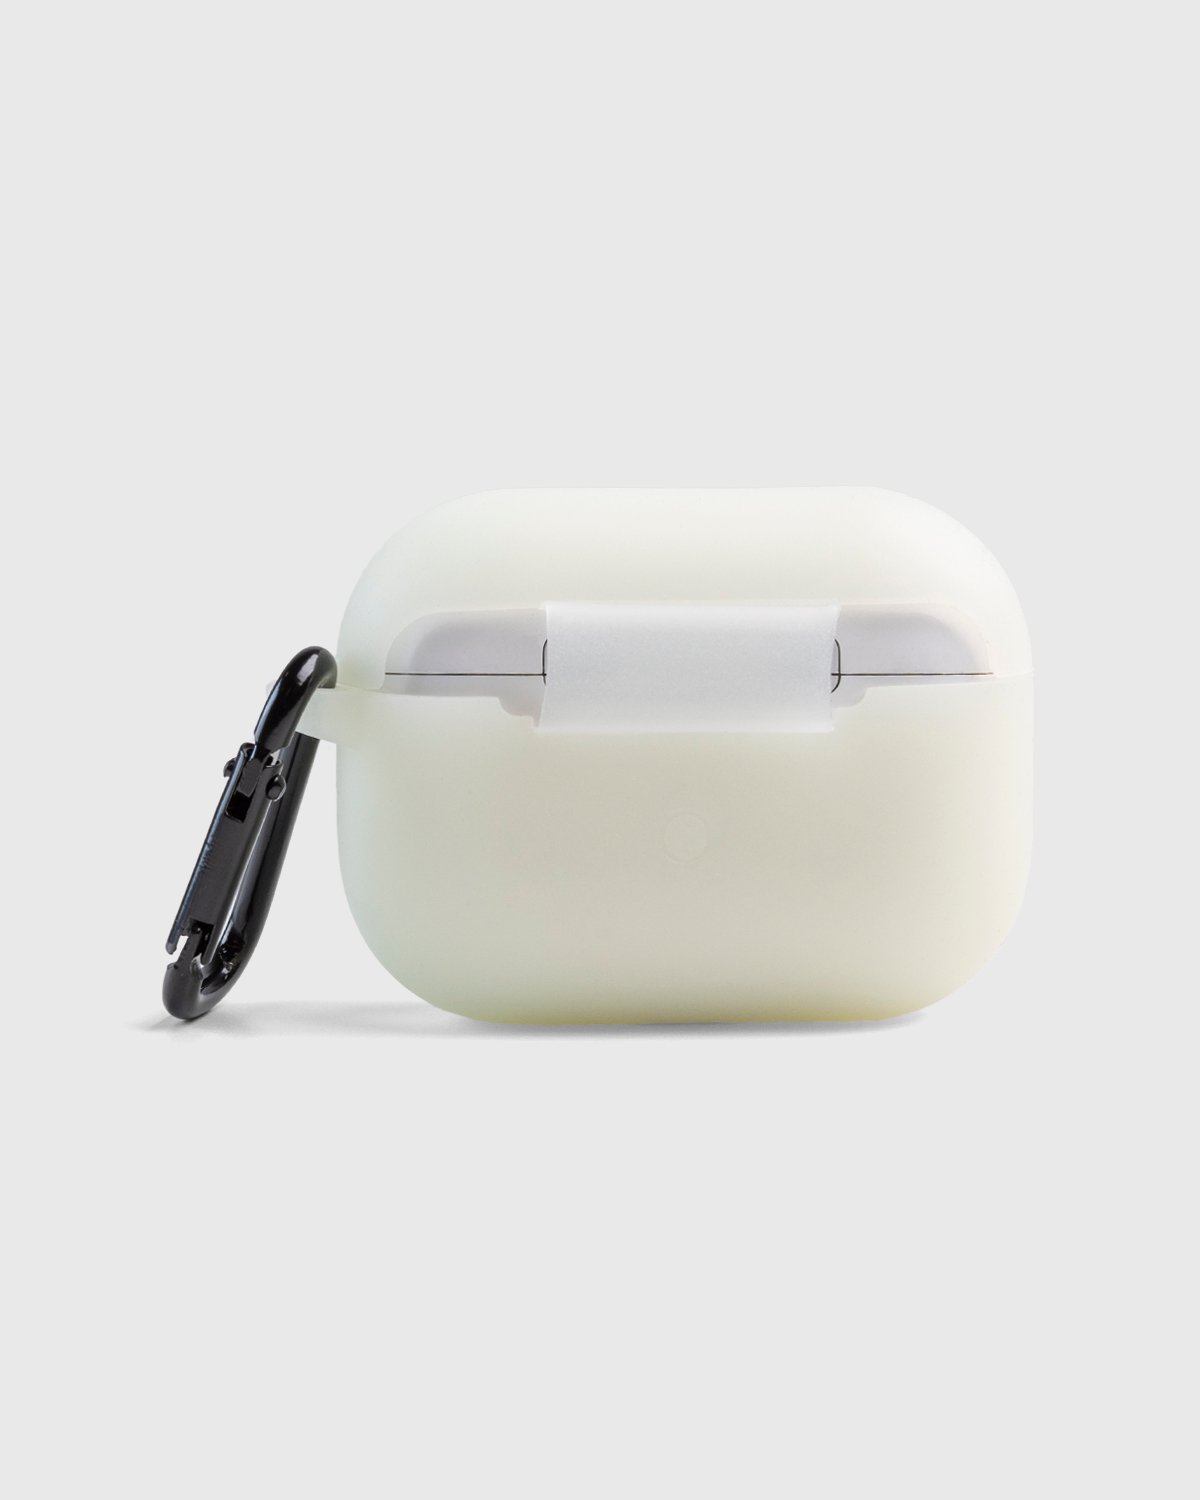 Carhartt WIP - Synthetic Realities AirPods Case Glow In The Dark Black - Accessories - White - Image 2